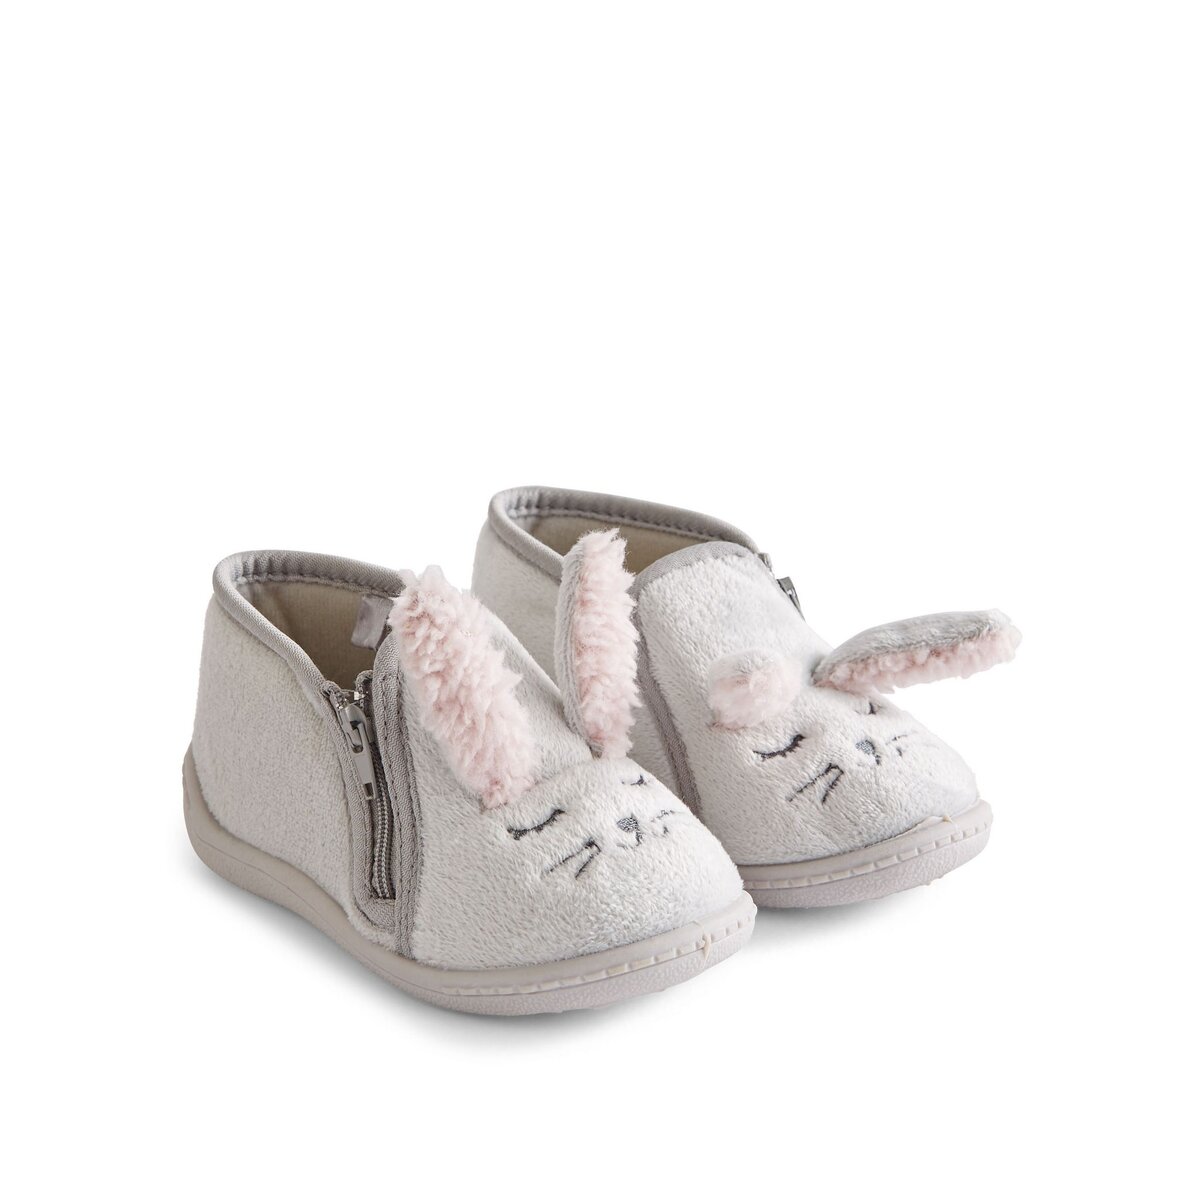 IN EXTENSO Chaussons velours lapin bébé fille